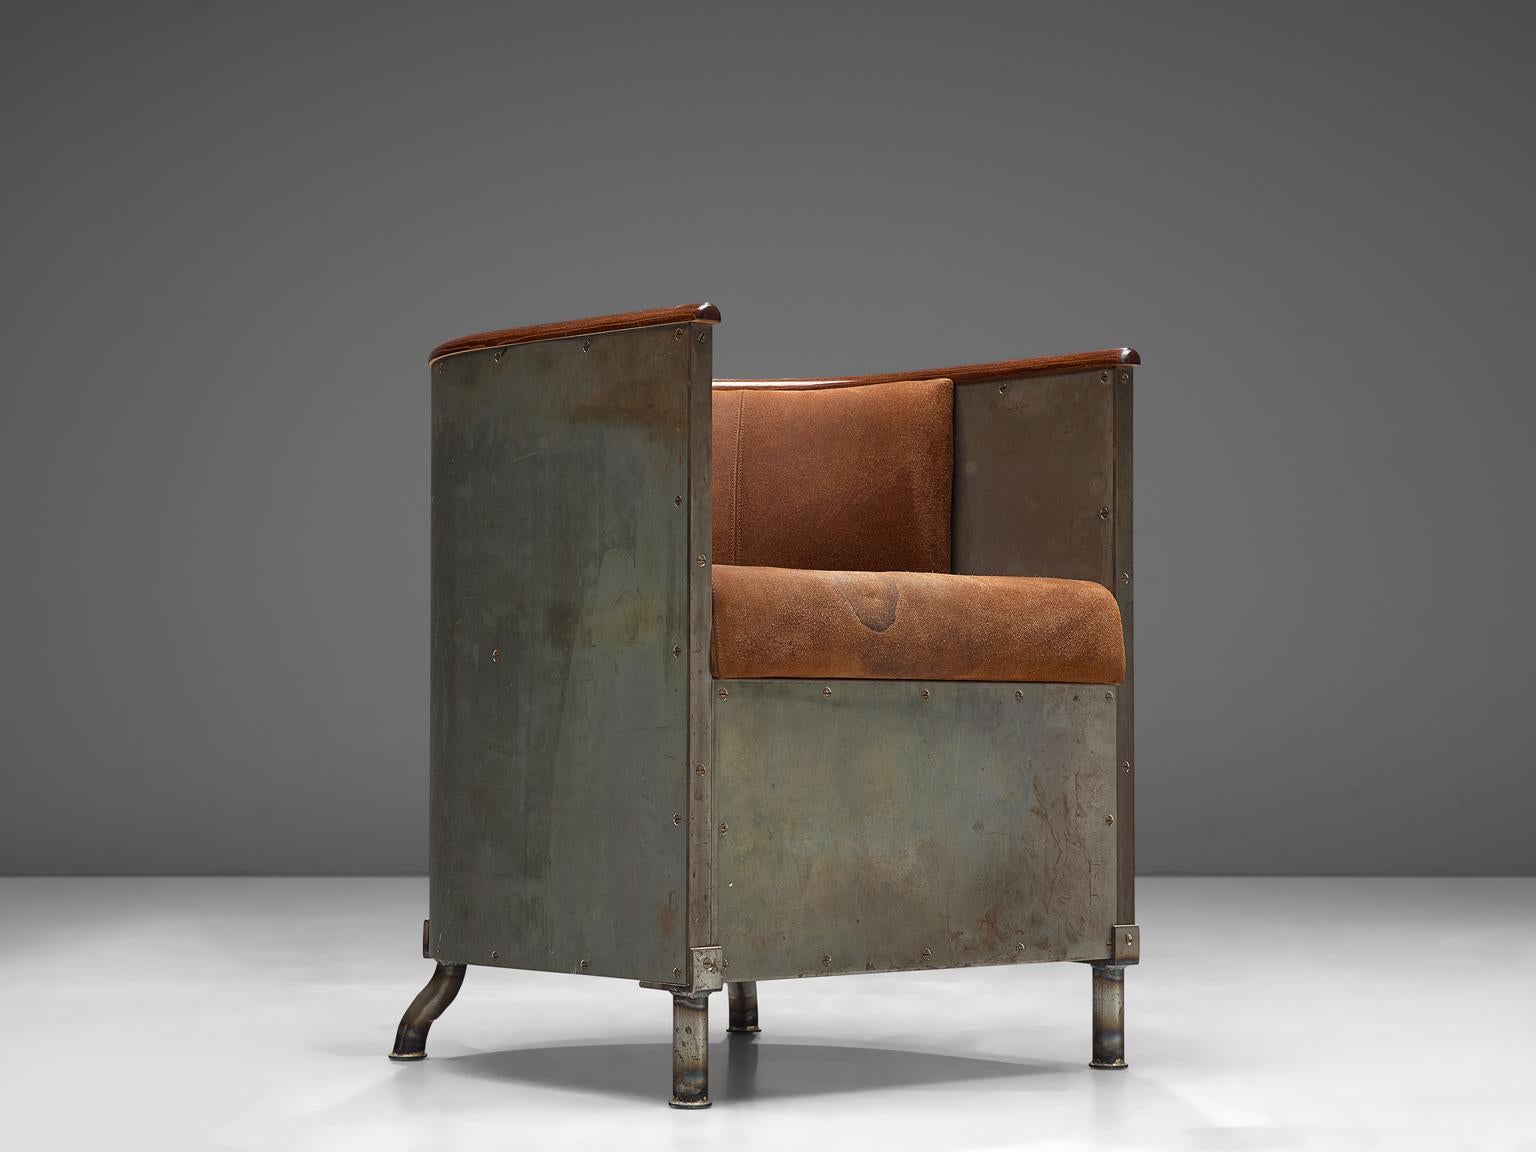 Mats Theselius for Källemo, Järn/Mocca Fätöljen chair edition 101/360, cognac suede, wood and steel, Sweden, 1994.

This chair is named the Jarn/Mocca chair, which means iron / mocca, referring to the material and colors in this design. The chair